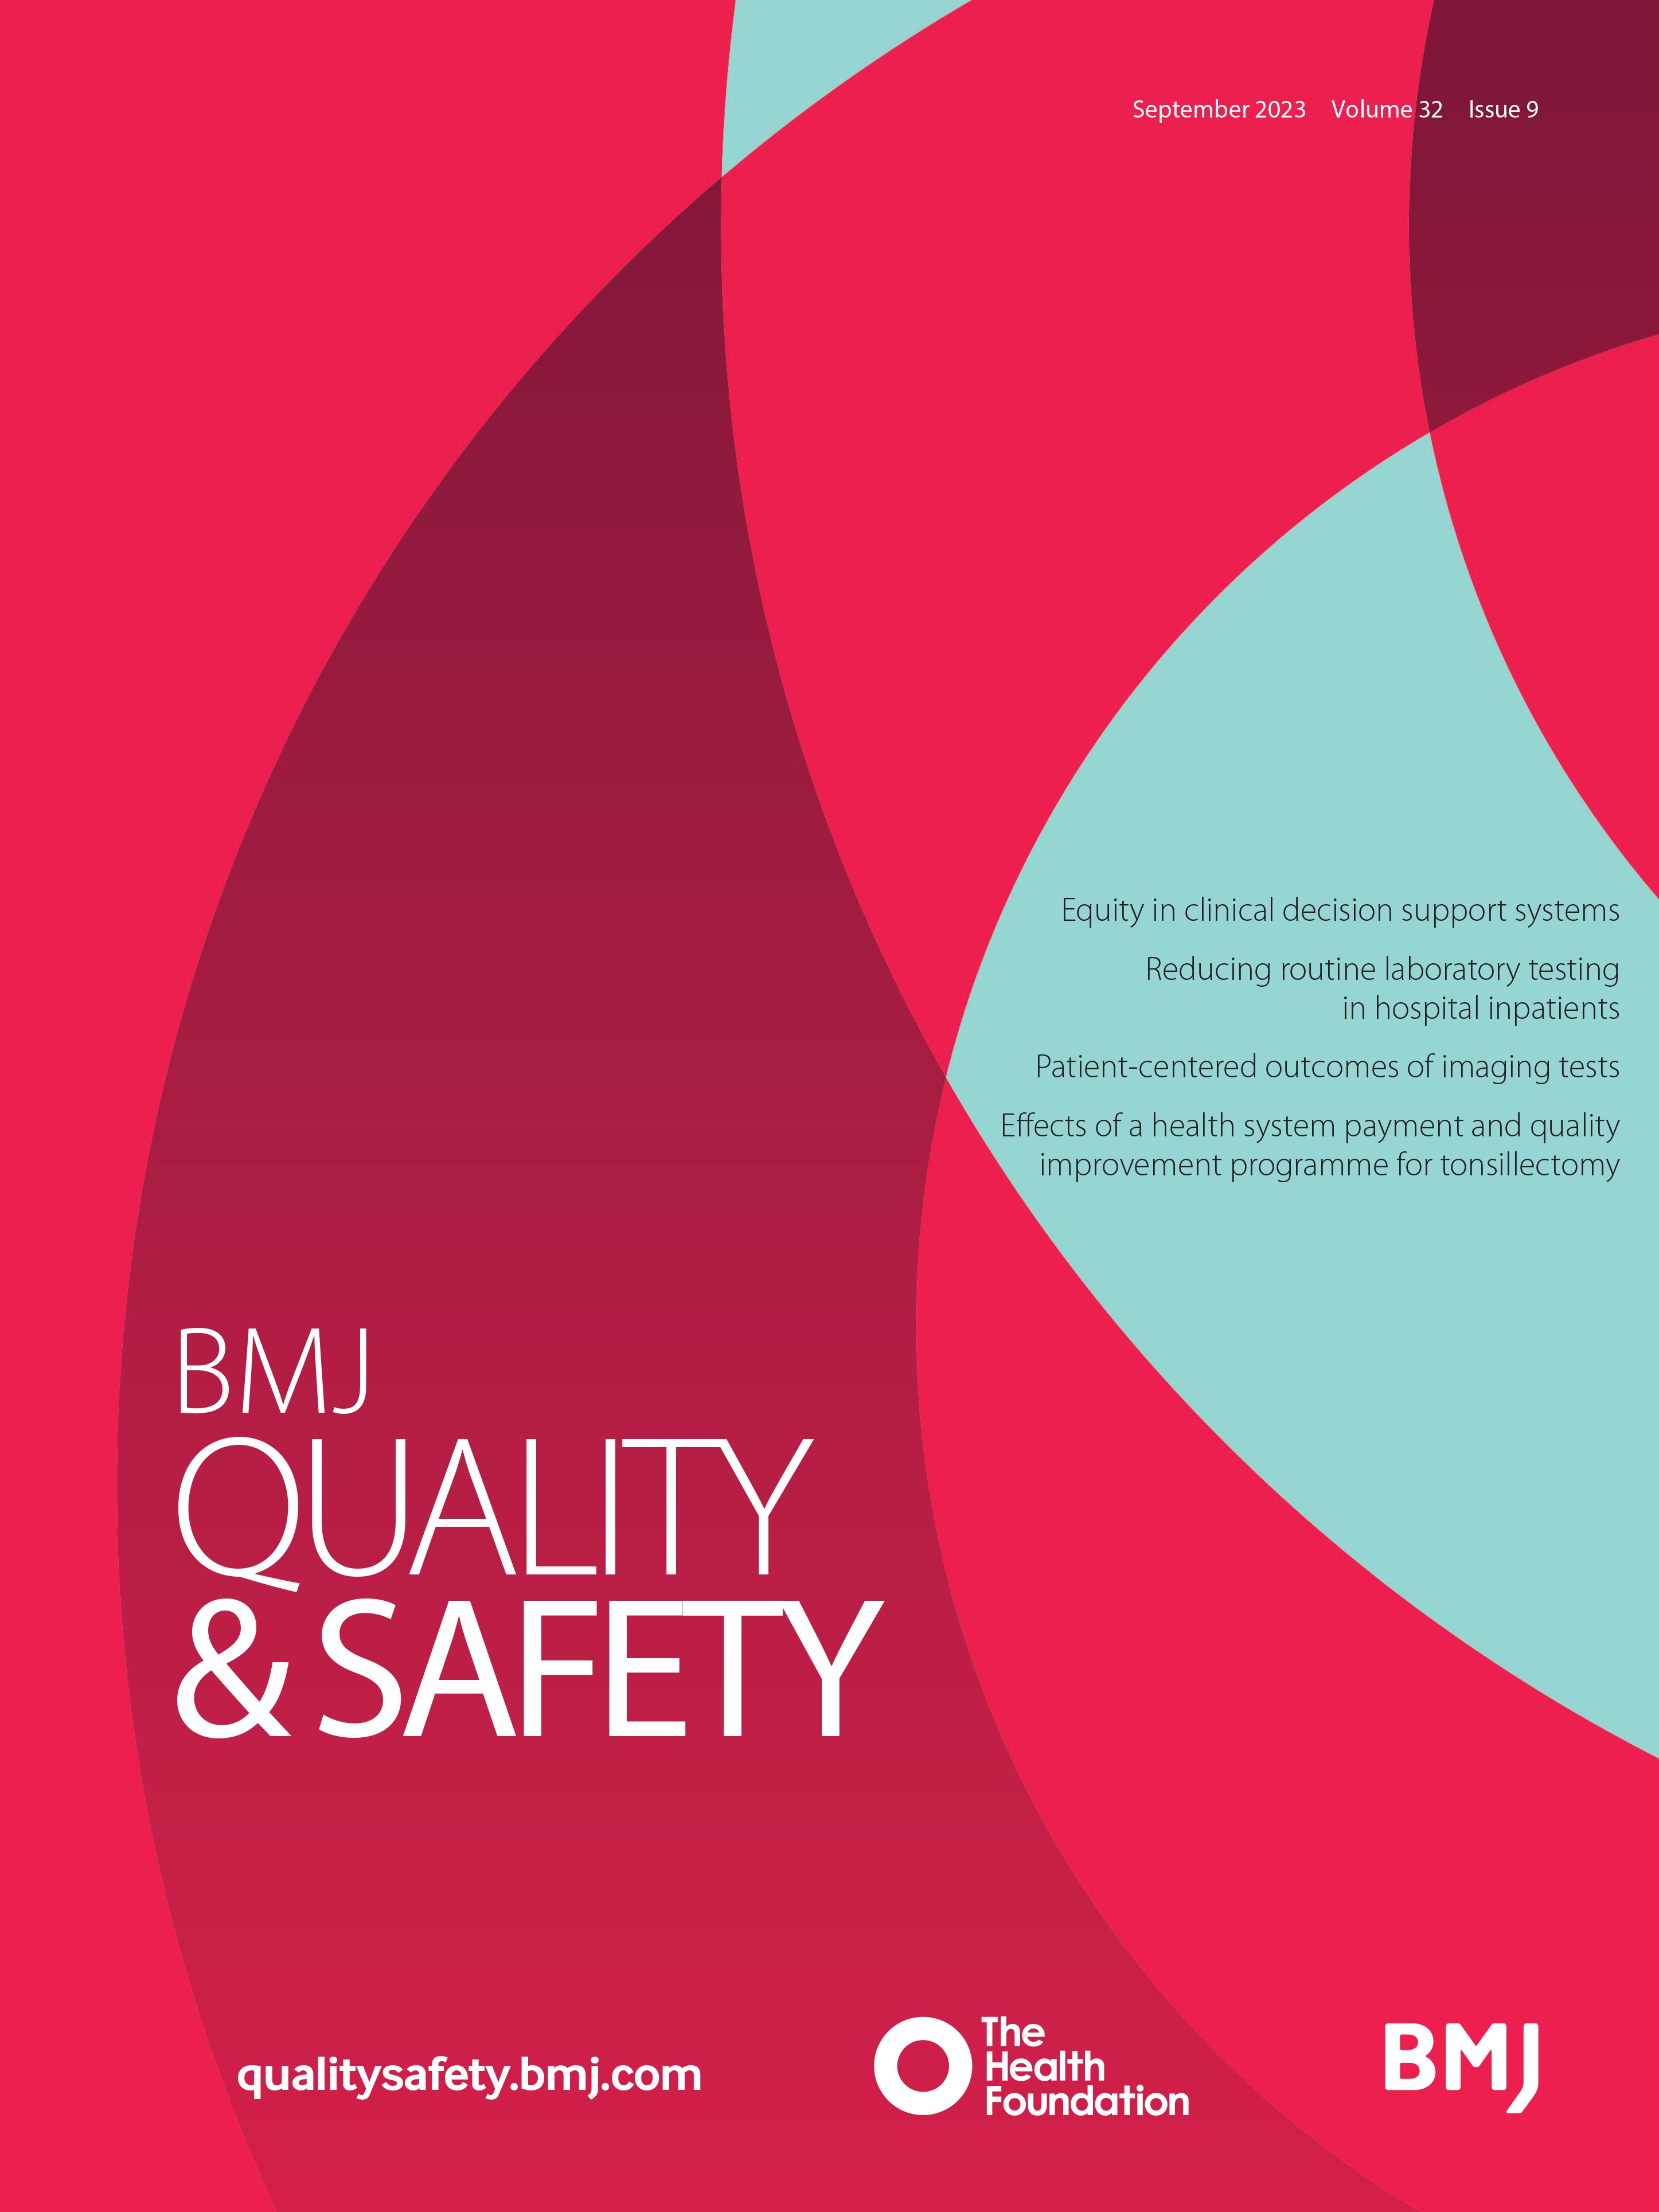 Evaluating equity in performance of an electronic health record-based 6-month mortality risk model to trigger palliative care consultation: a retrospective model validation analysis